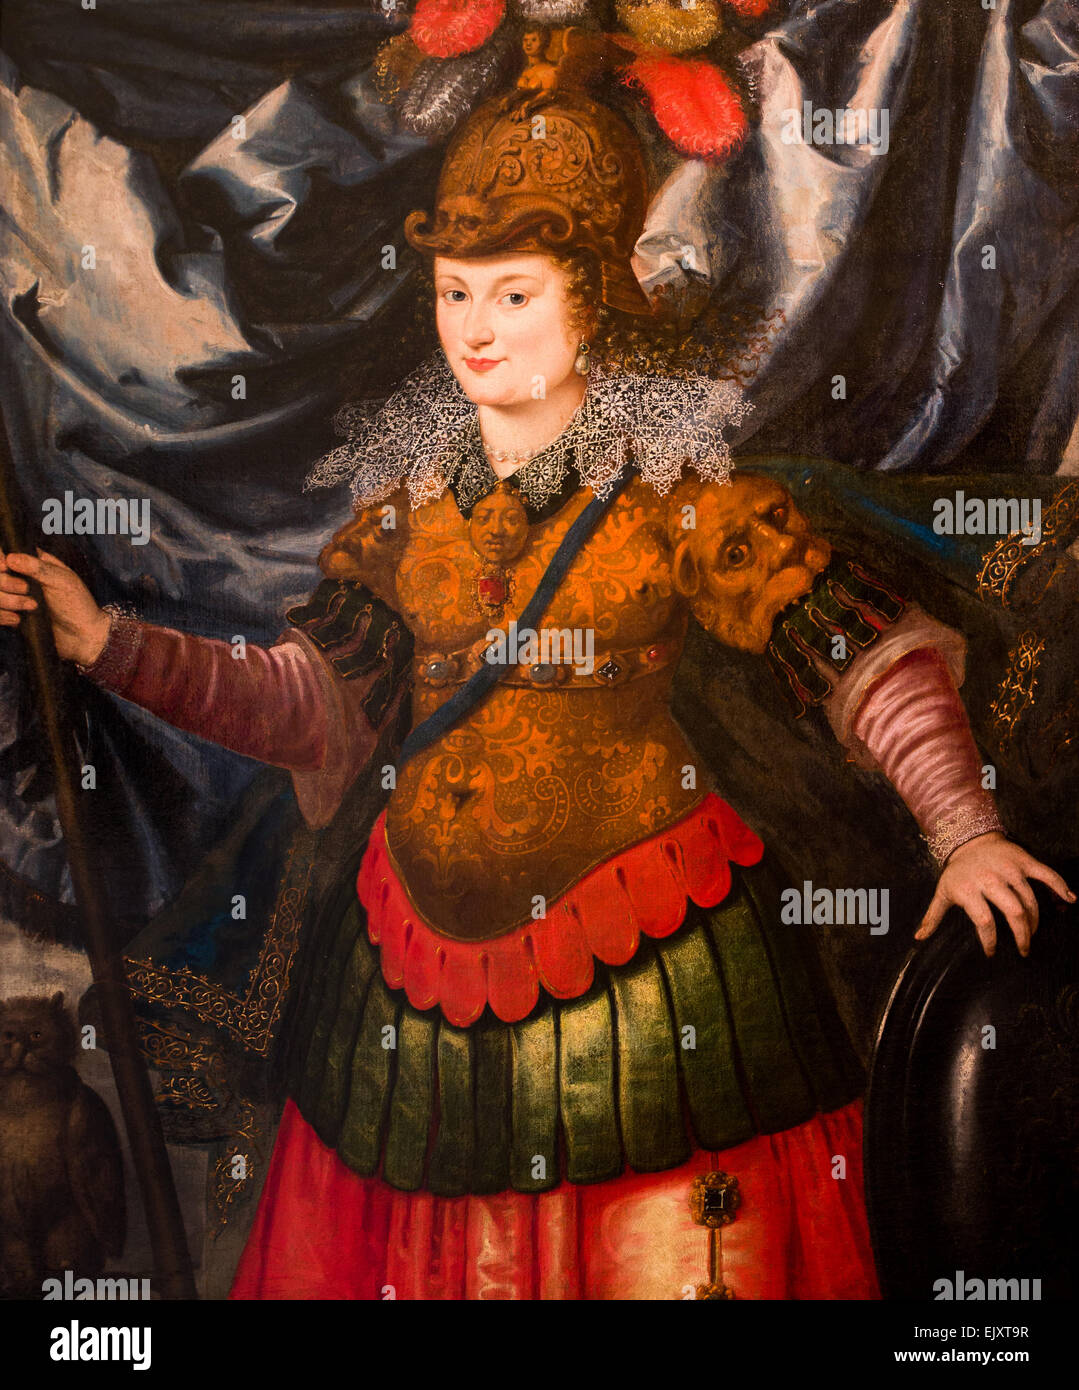 ActiveMuseum 0005991.jpg / Portrait of a Woman as Minerva, the presence of the owl and the military attibues are allusions to Minerva, goddess of wisdom and intelligence 05/12/2013  -   / 17th century Collection / Active Museum Stock Photo